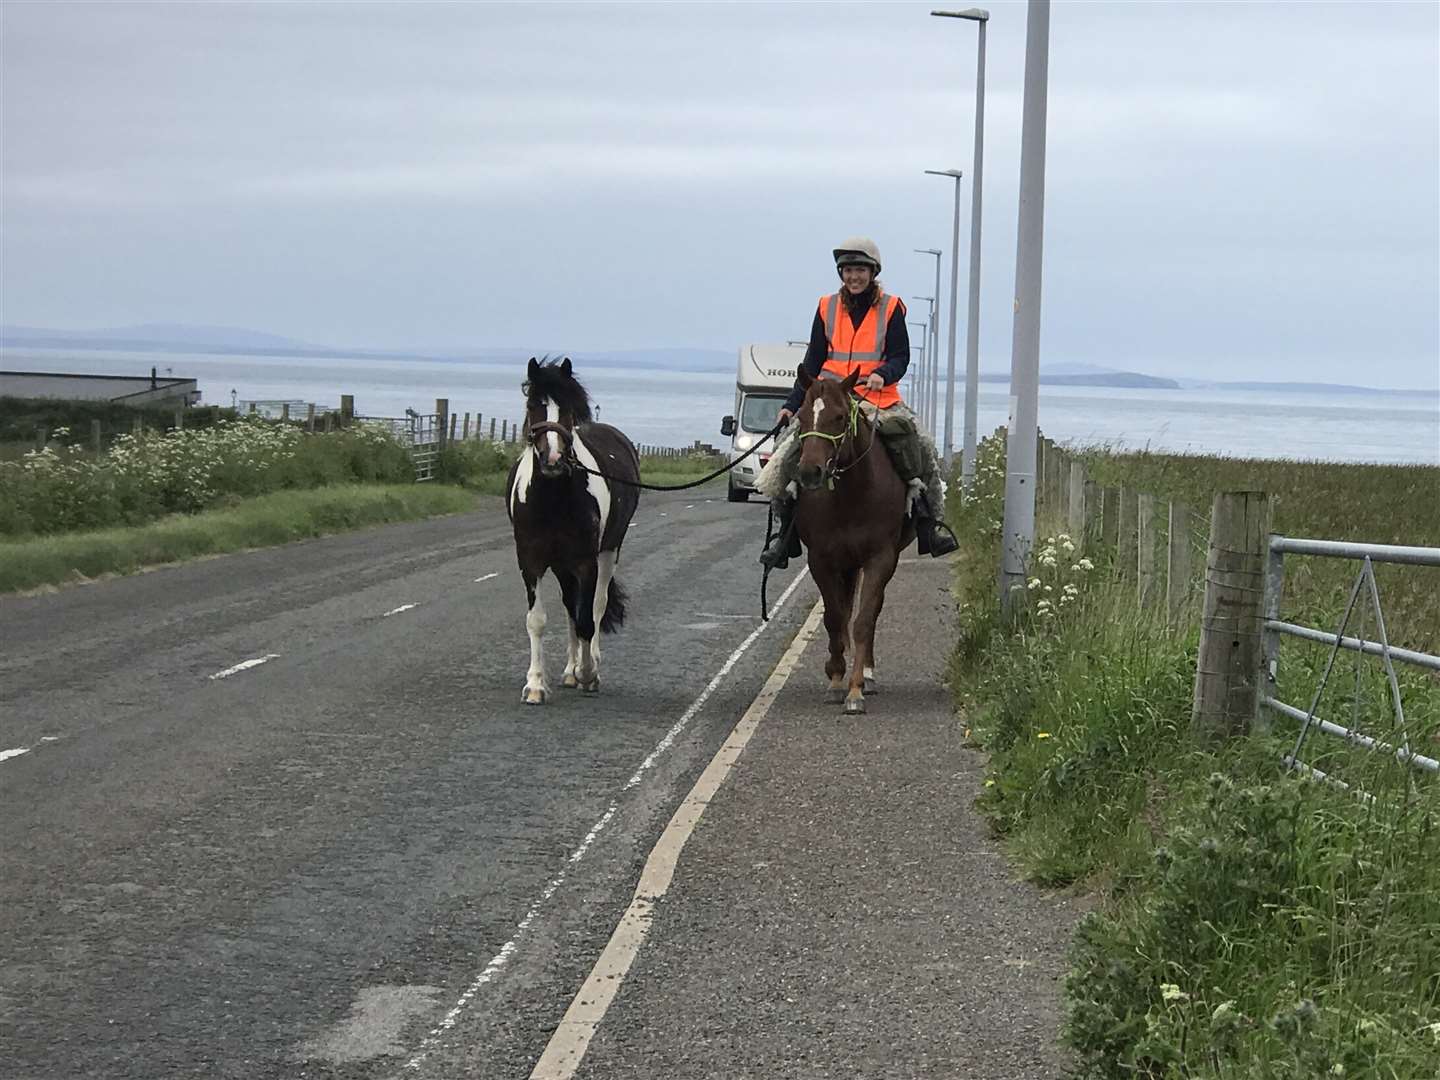 Elsa swapped to her hard hat and hi-vis waistcoat as took to the road, riding Rosie and leading Summer along towards the Seaview Hotel at John O'Groats, before taking the back roads to Lyth.